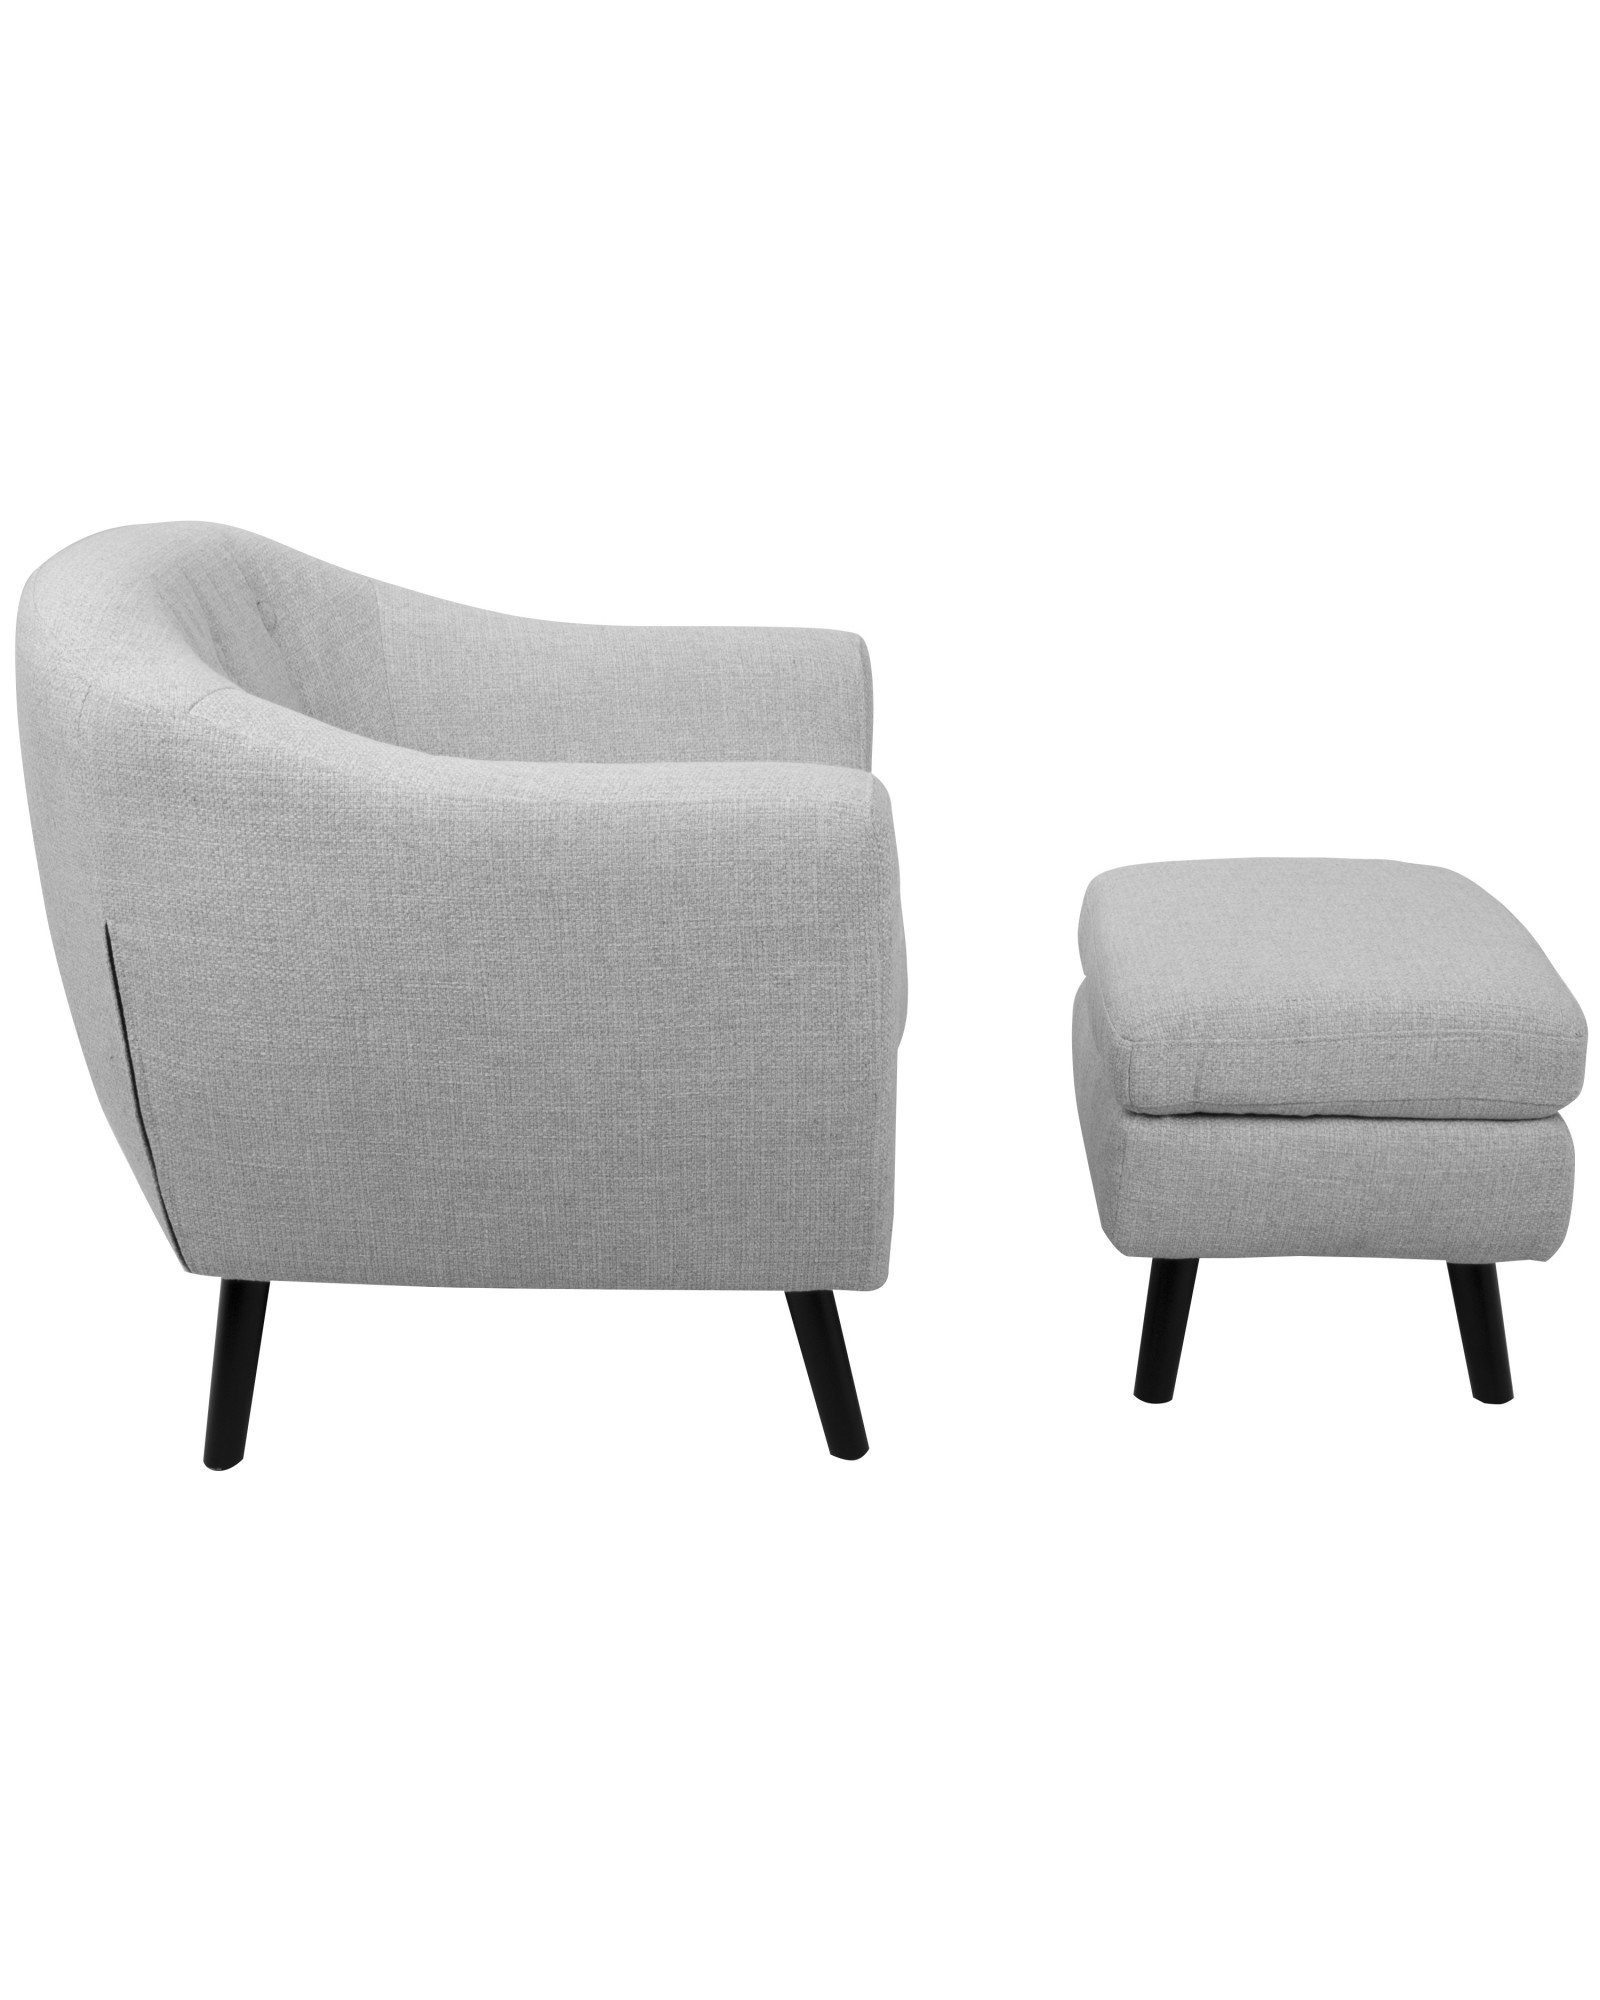 Rockwell Mid-Century Modern Accent Chair and Ottoman in Light Grey Noise Fabric